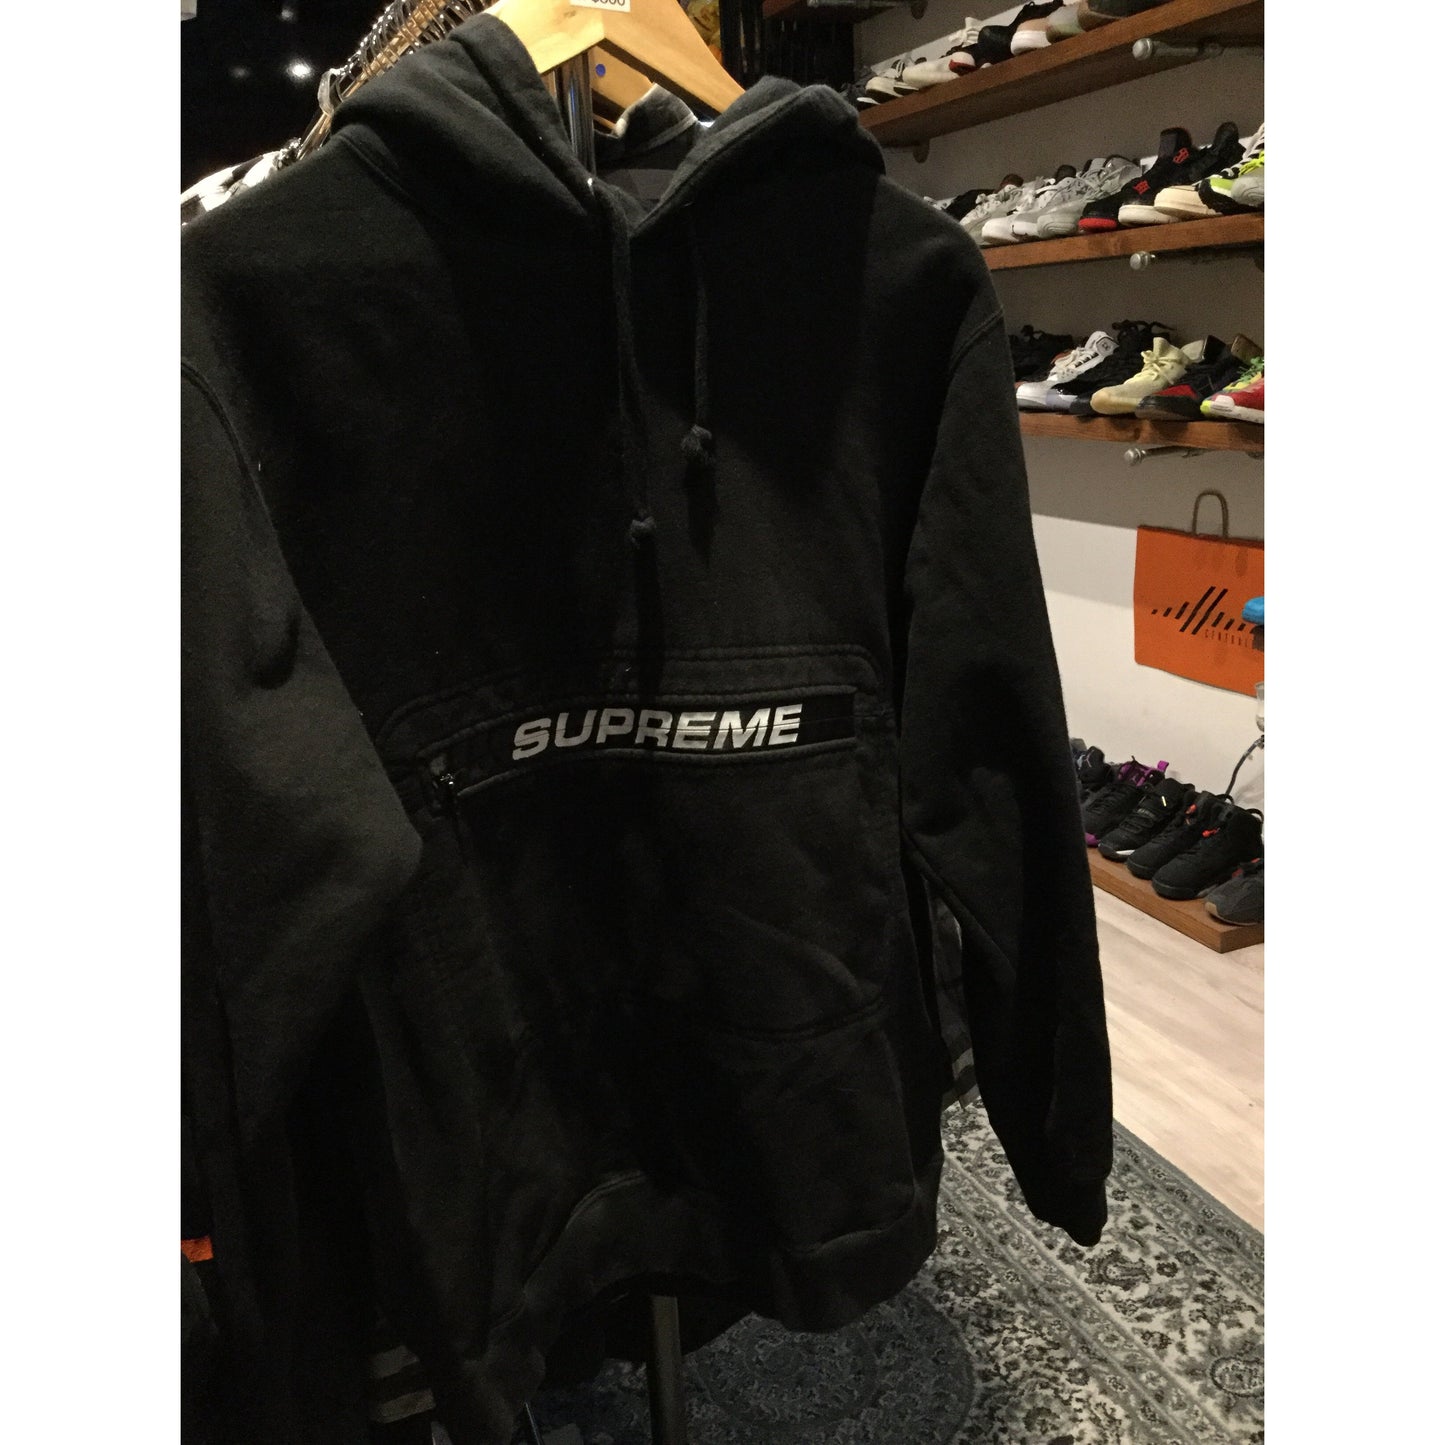 Supreme Middle Zip up Hoodie “Black” - Centrall Online